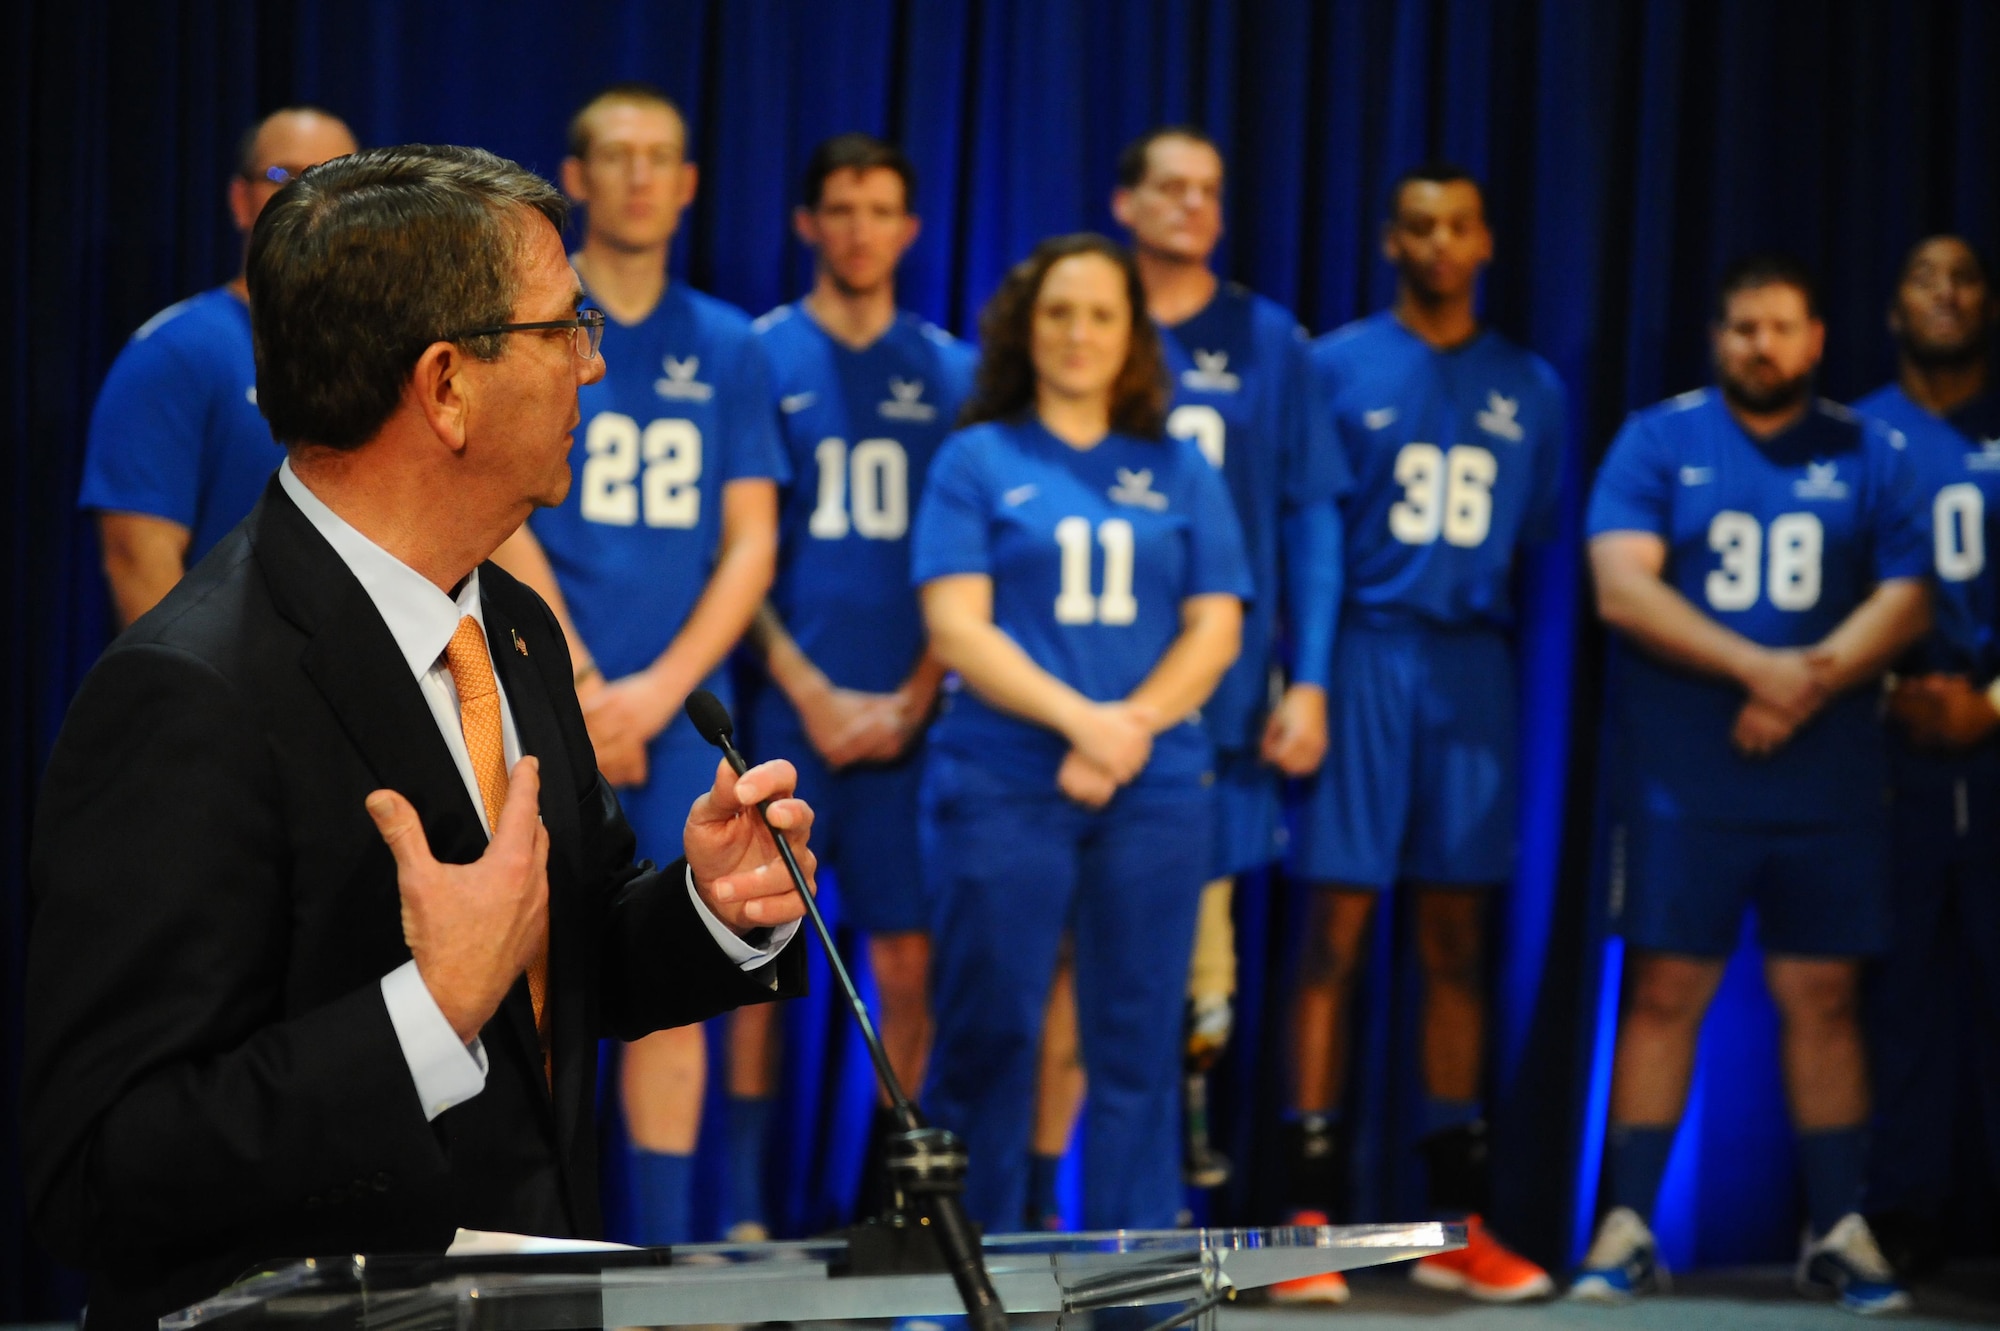 Defense Secretary Ash Carter speaks to a crowd of fans at the trophy presentation during the Warrior Care Month Sitting Volleyball Tournament at the Pentagon in Washington D.C., Nov. 19, 2015. The Air Force team edged out the Marines in the final match. (U.S. Air Force photo/Senior Airman Hailey Haux)